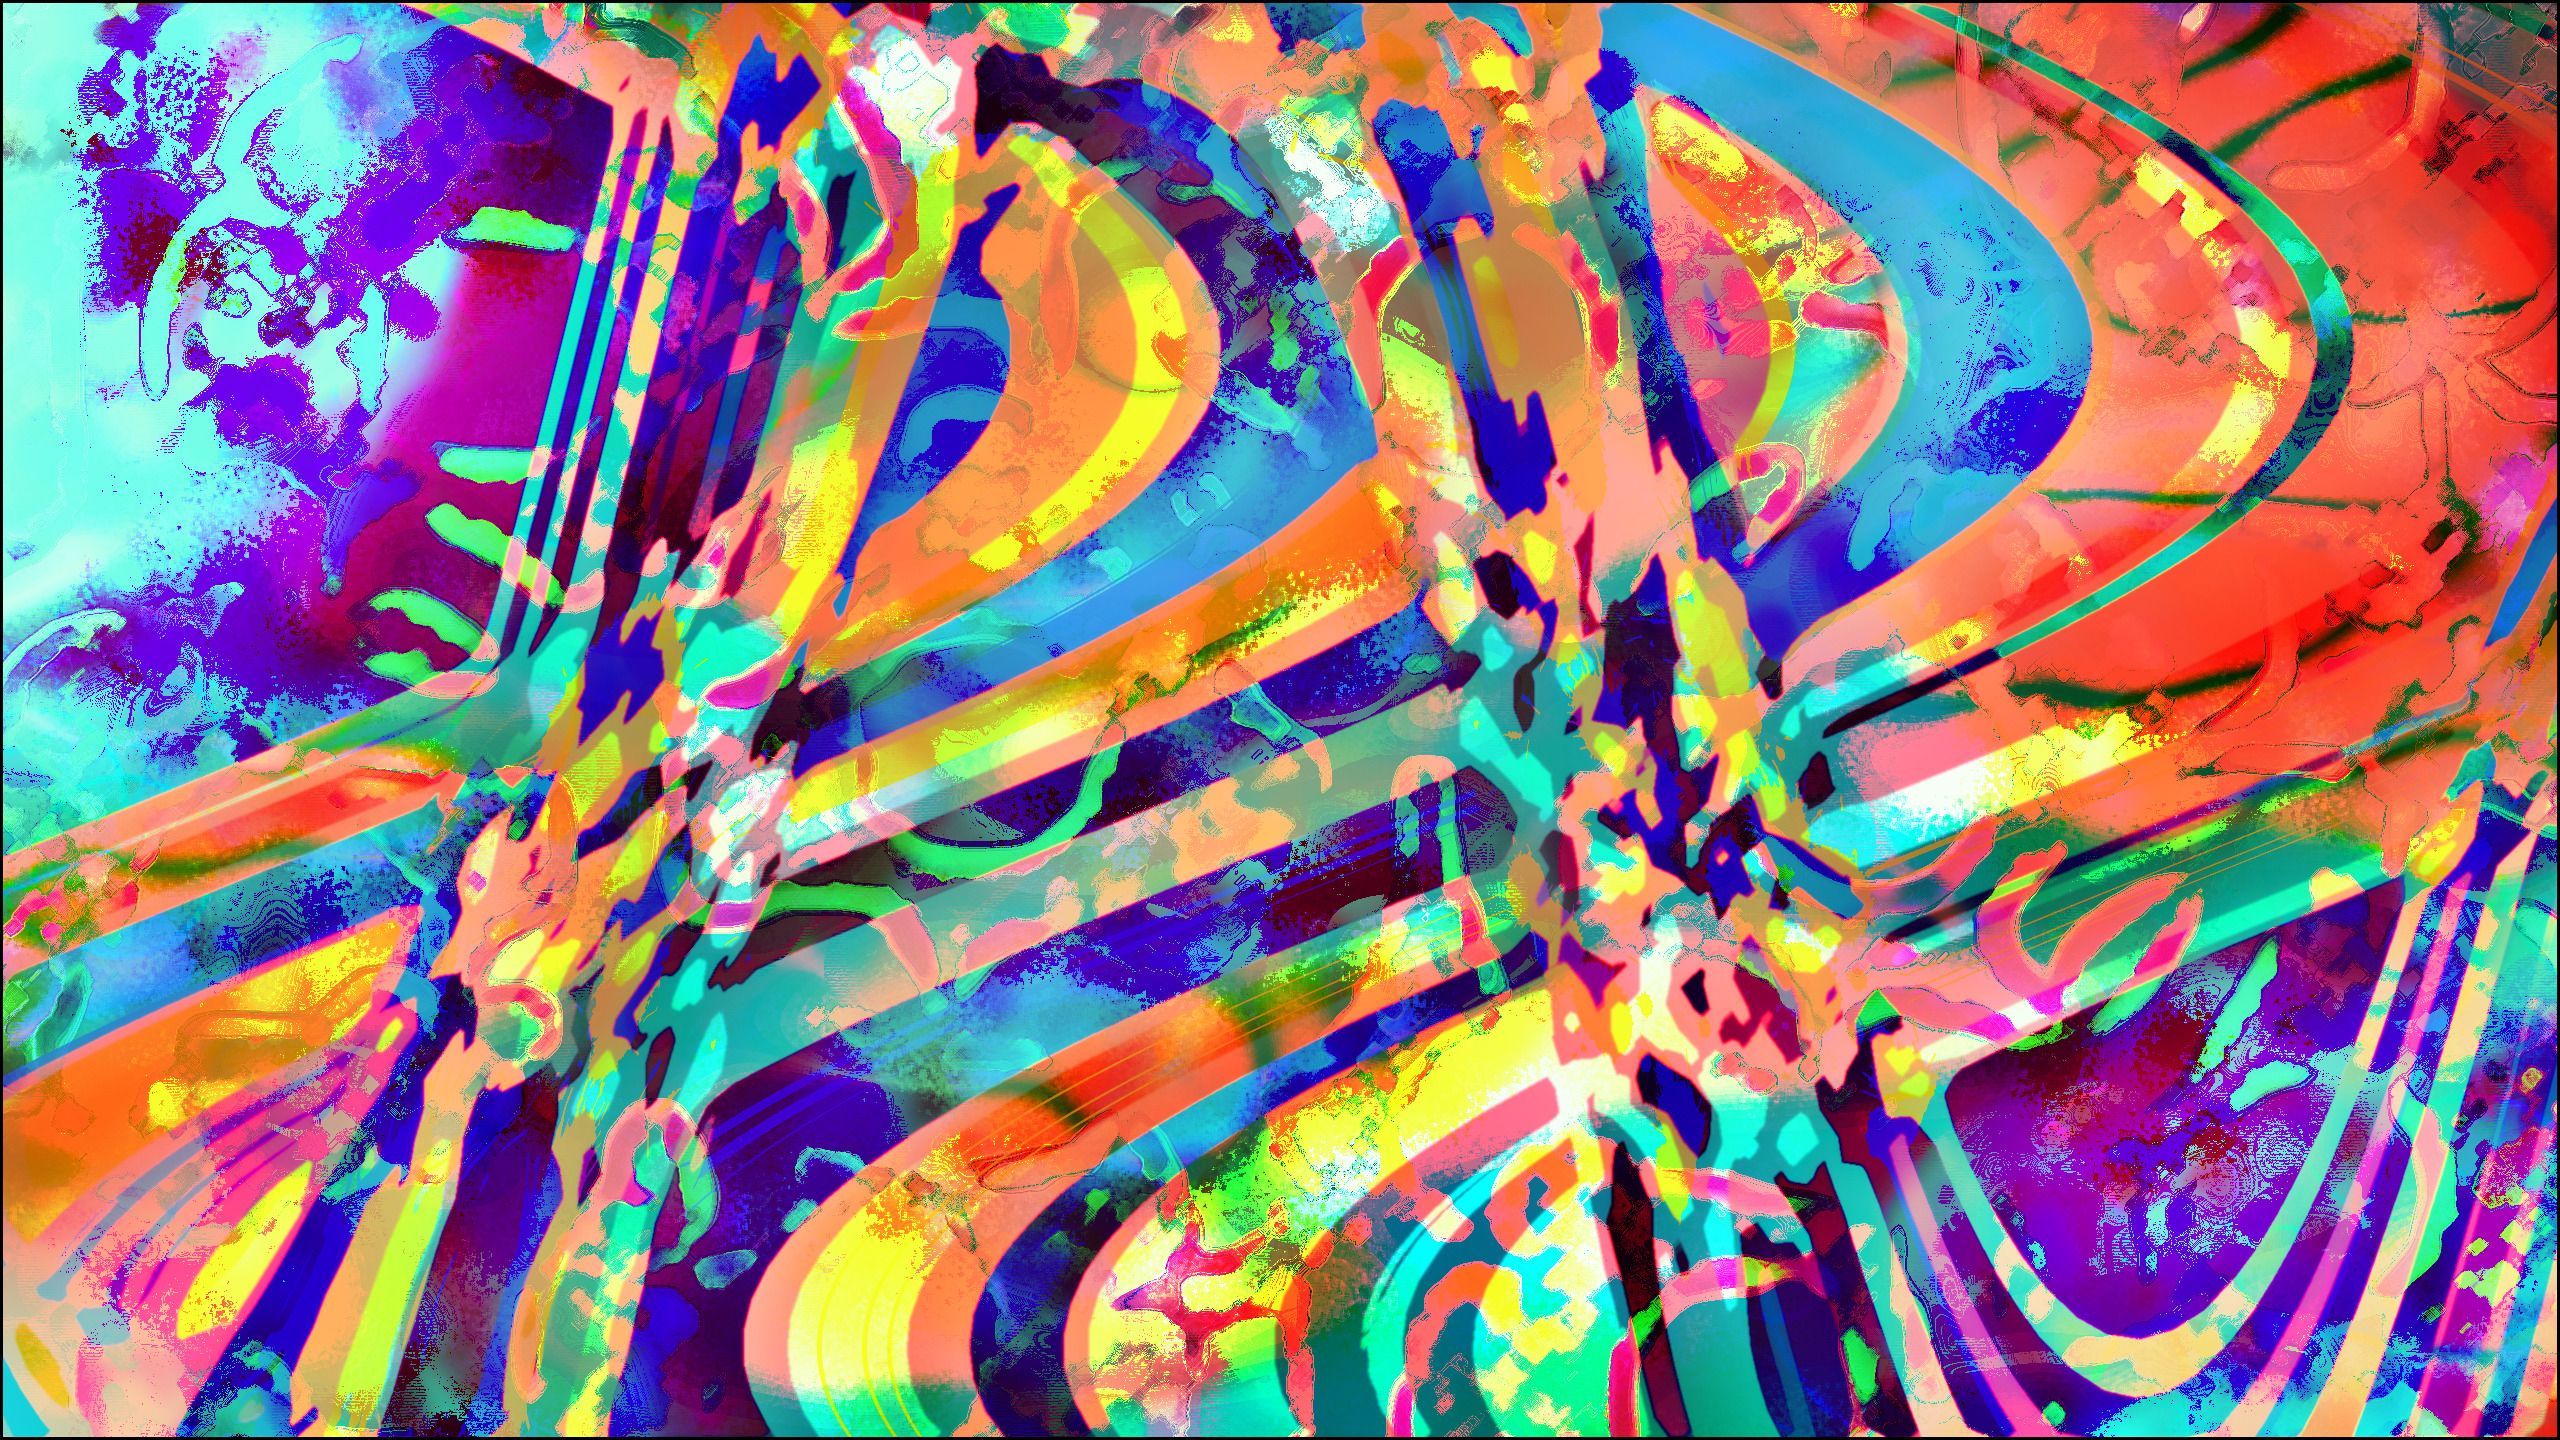 Abstract lsd trippy brightness space psychedelic digital art artwork surreal